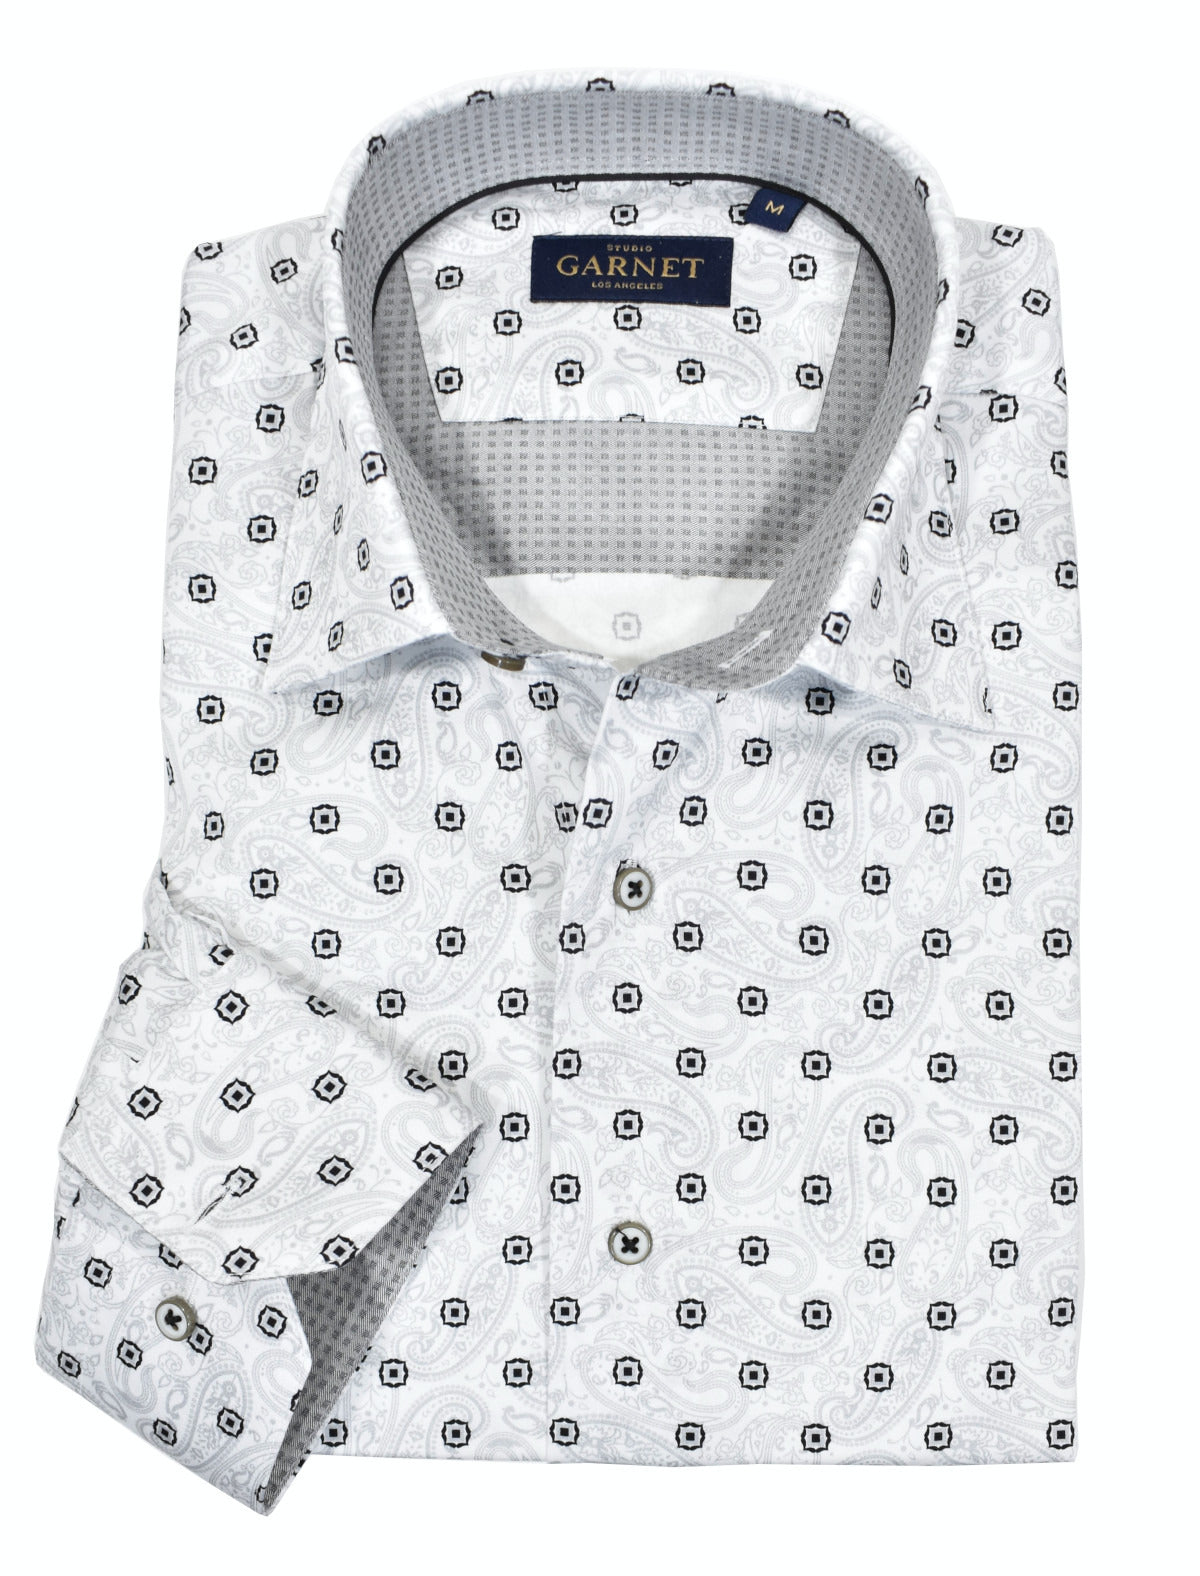 This fabric looks richly elegant in person with the smoked out floating paisleys and strong over print medallions.  Cotton sateen fabric, soft contrast trim fabric and contrast neck band piping for added style.  Medium collar and a classic shaped fit.